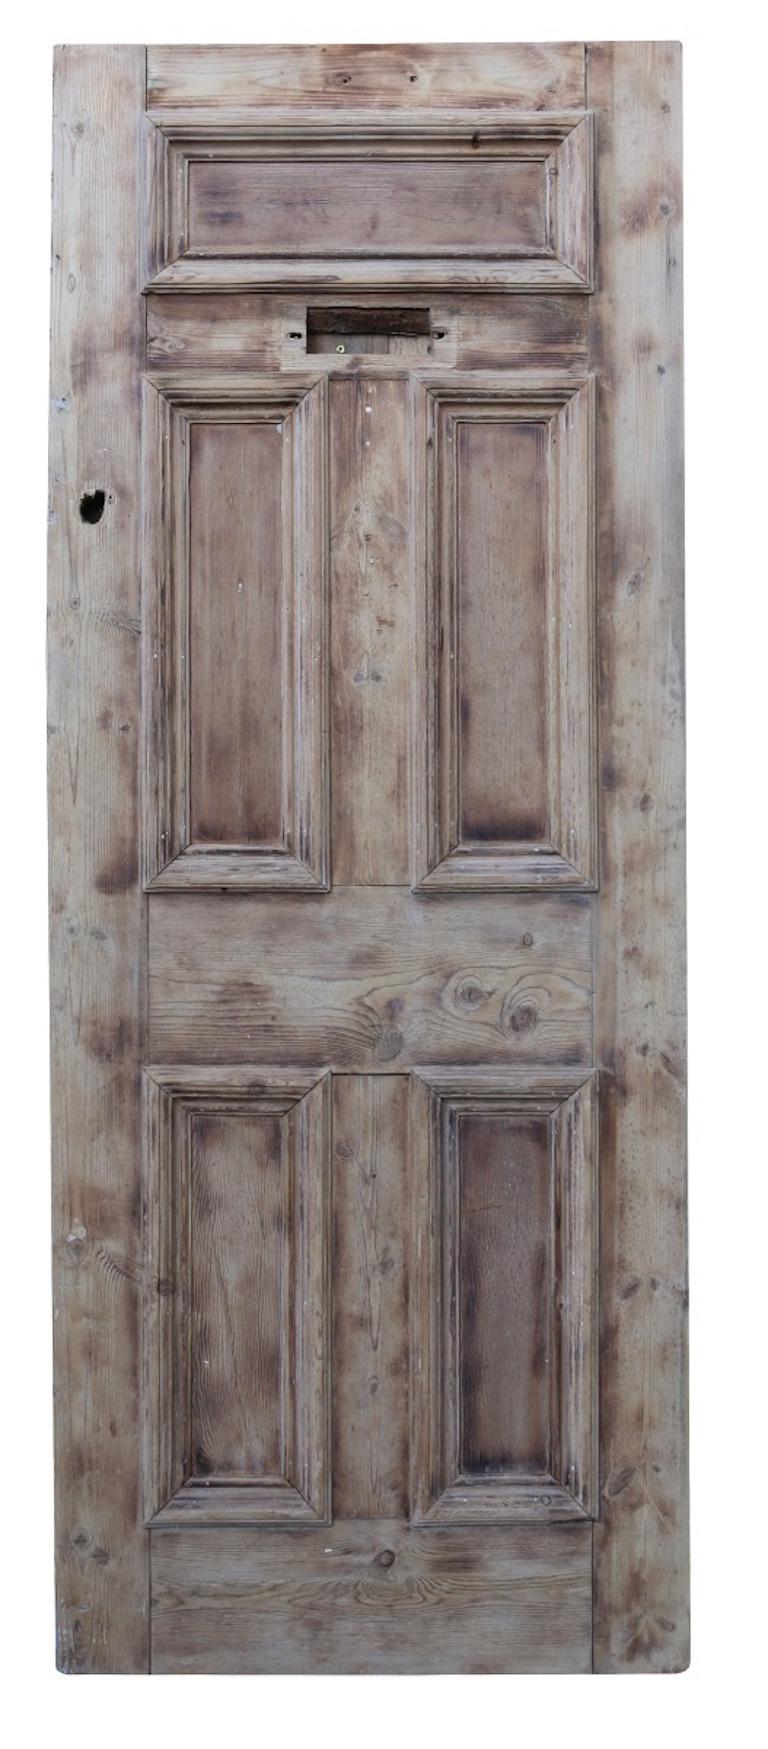 A reclaimed front door, constructed from pine, with a stripped and sanded finish.